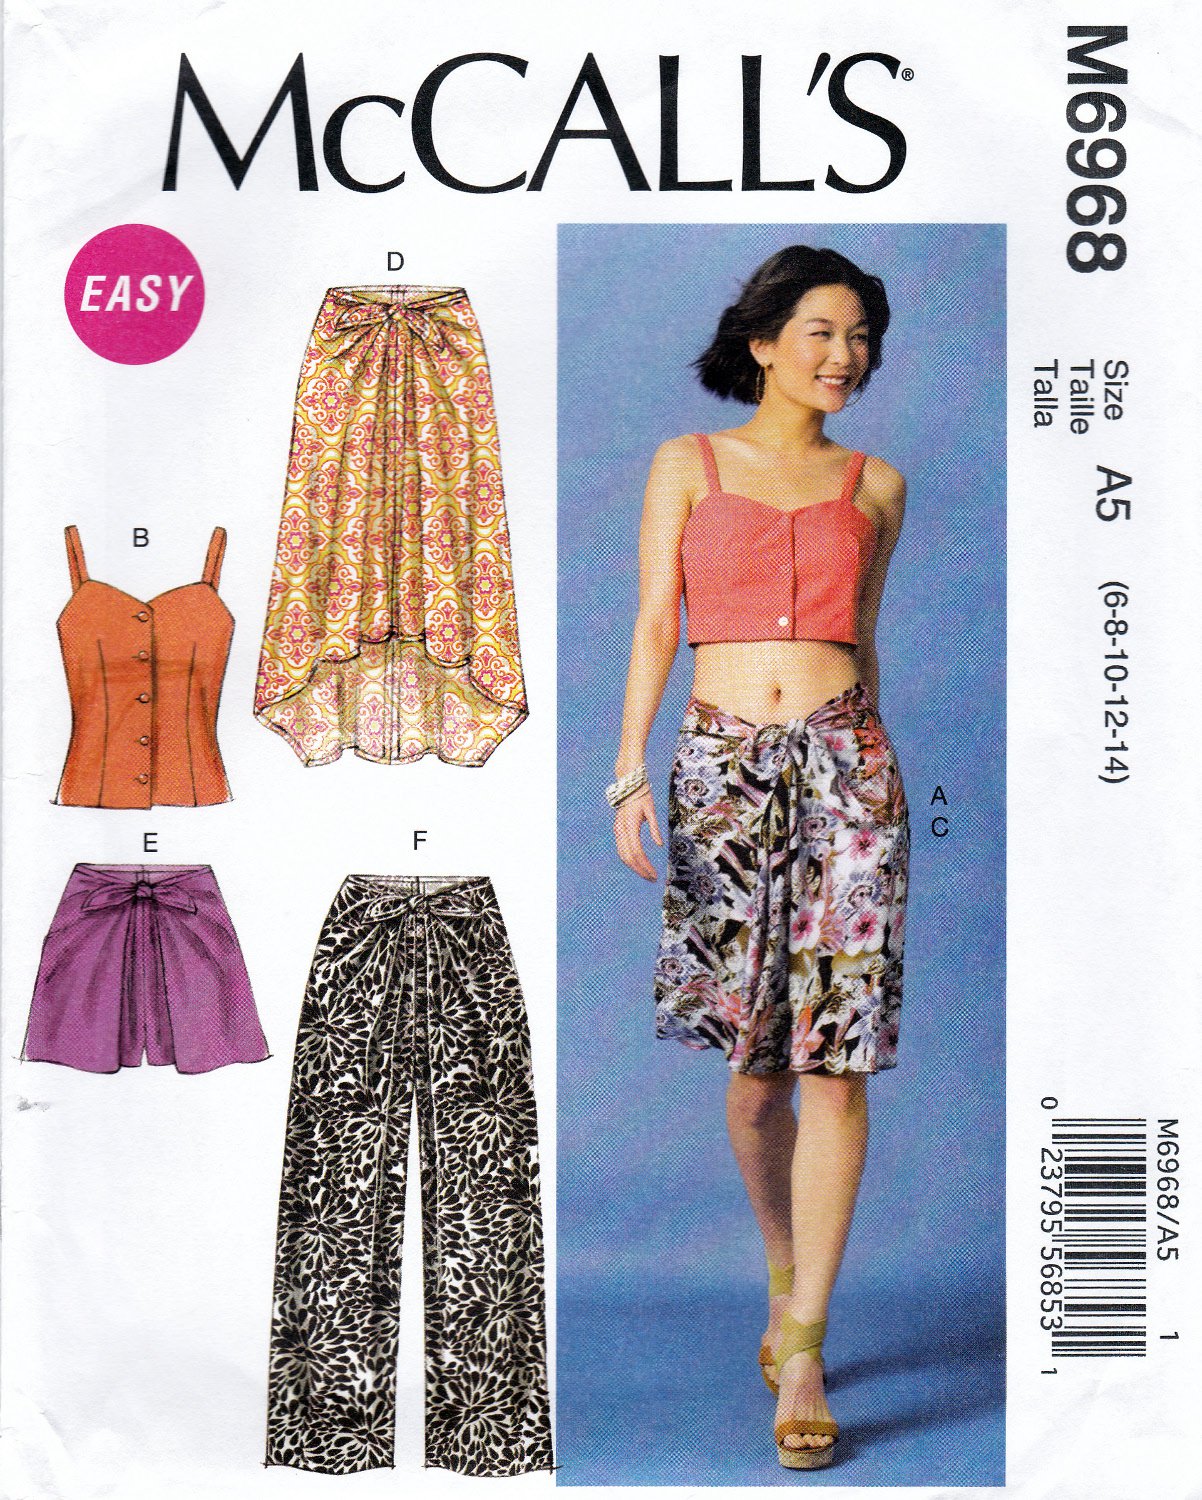 McCall's M6968 6968 Misses Sewing Pattern Tops Skirts Shorts Pants Easy Sizes 6-8-10-12-14